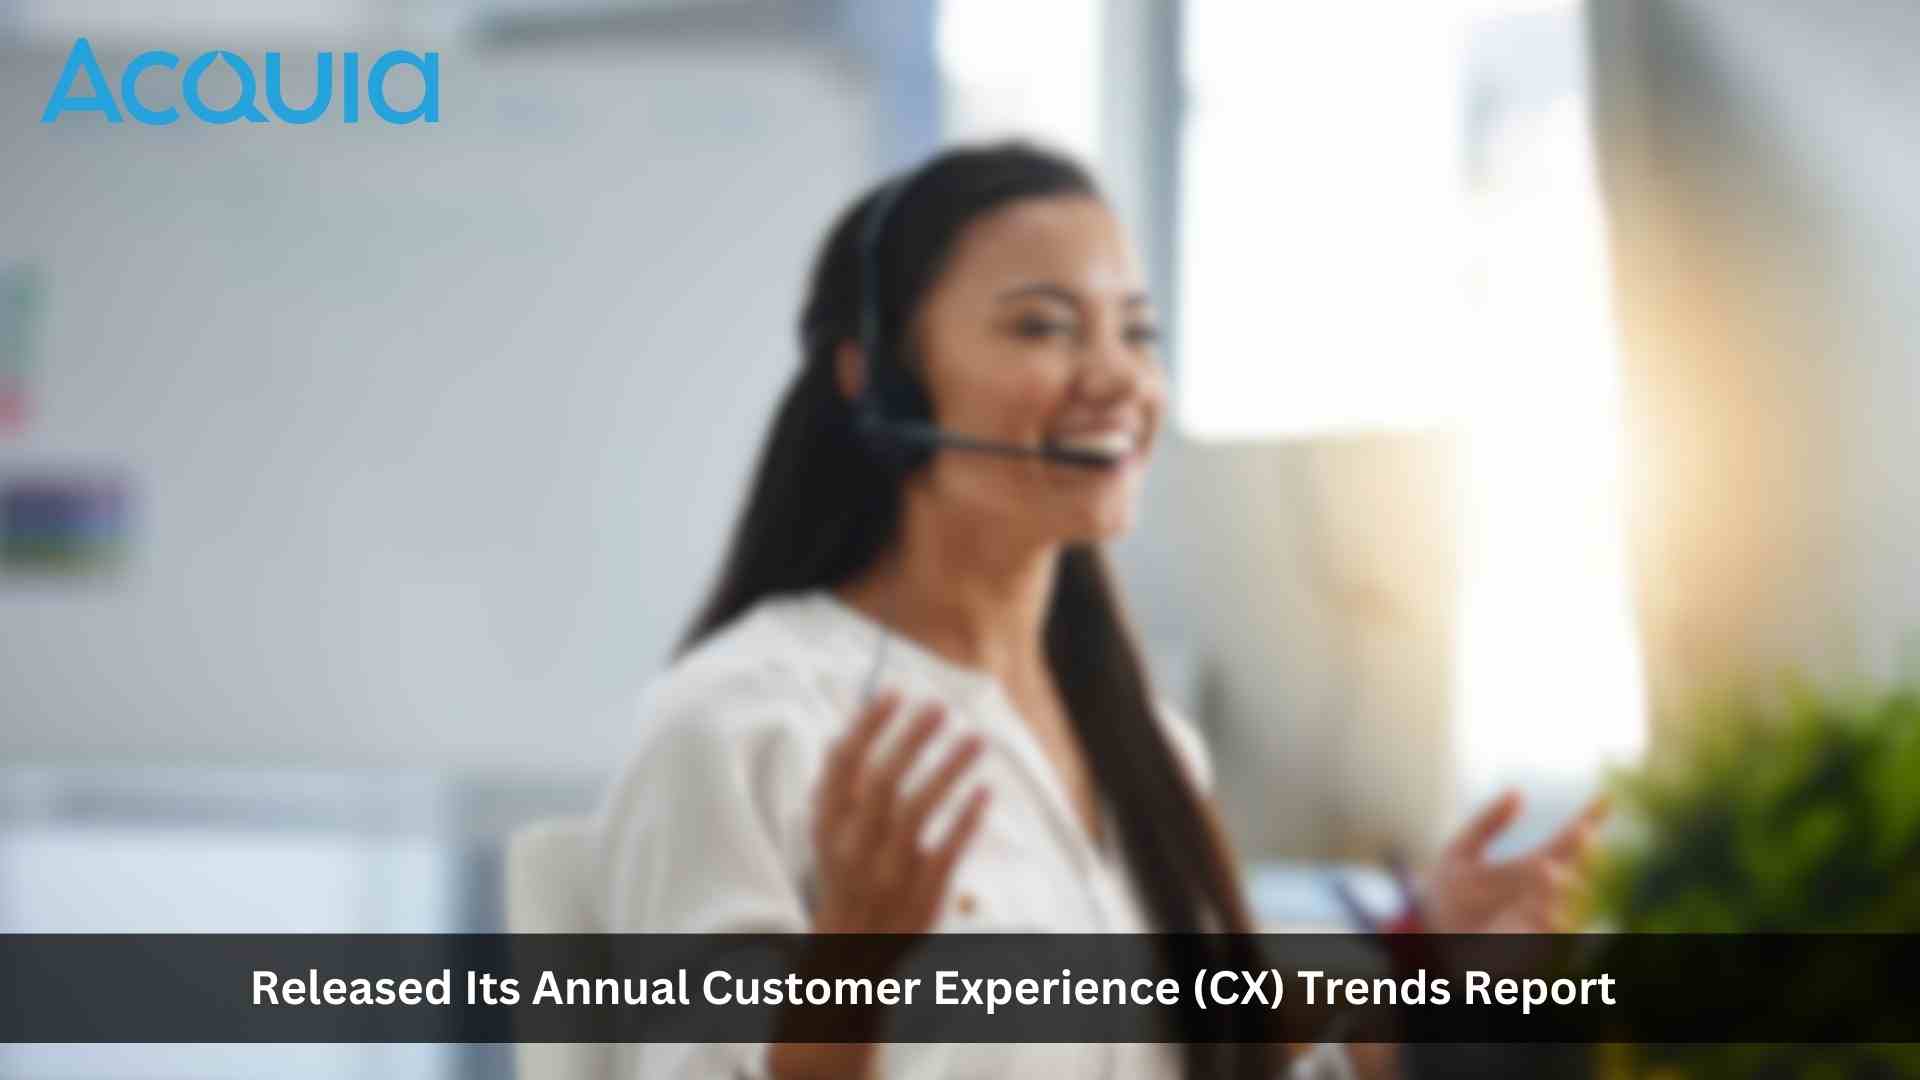 Acquia’s Annual Customer Experience (CX) Trends Survey Reveals Challenges for Marketers